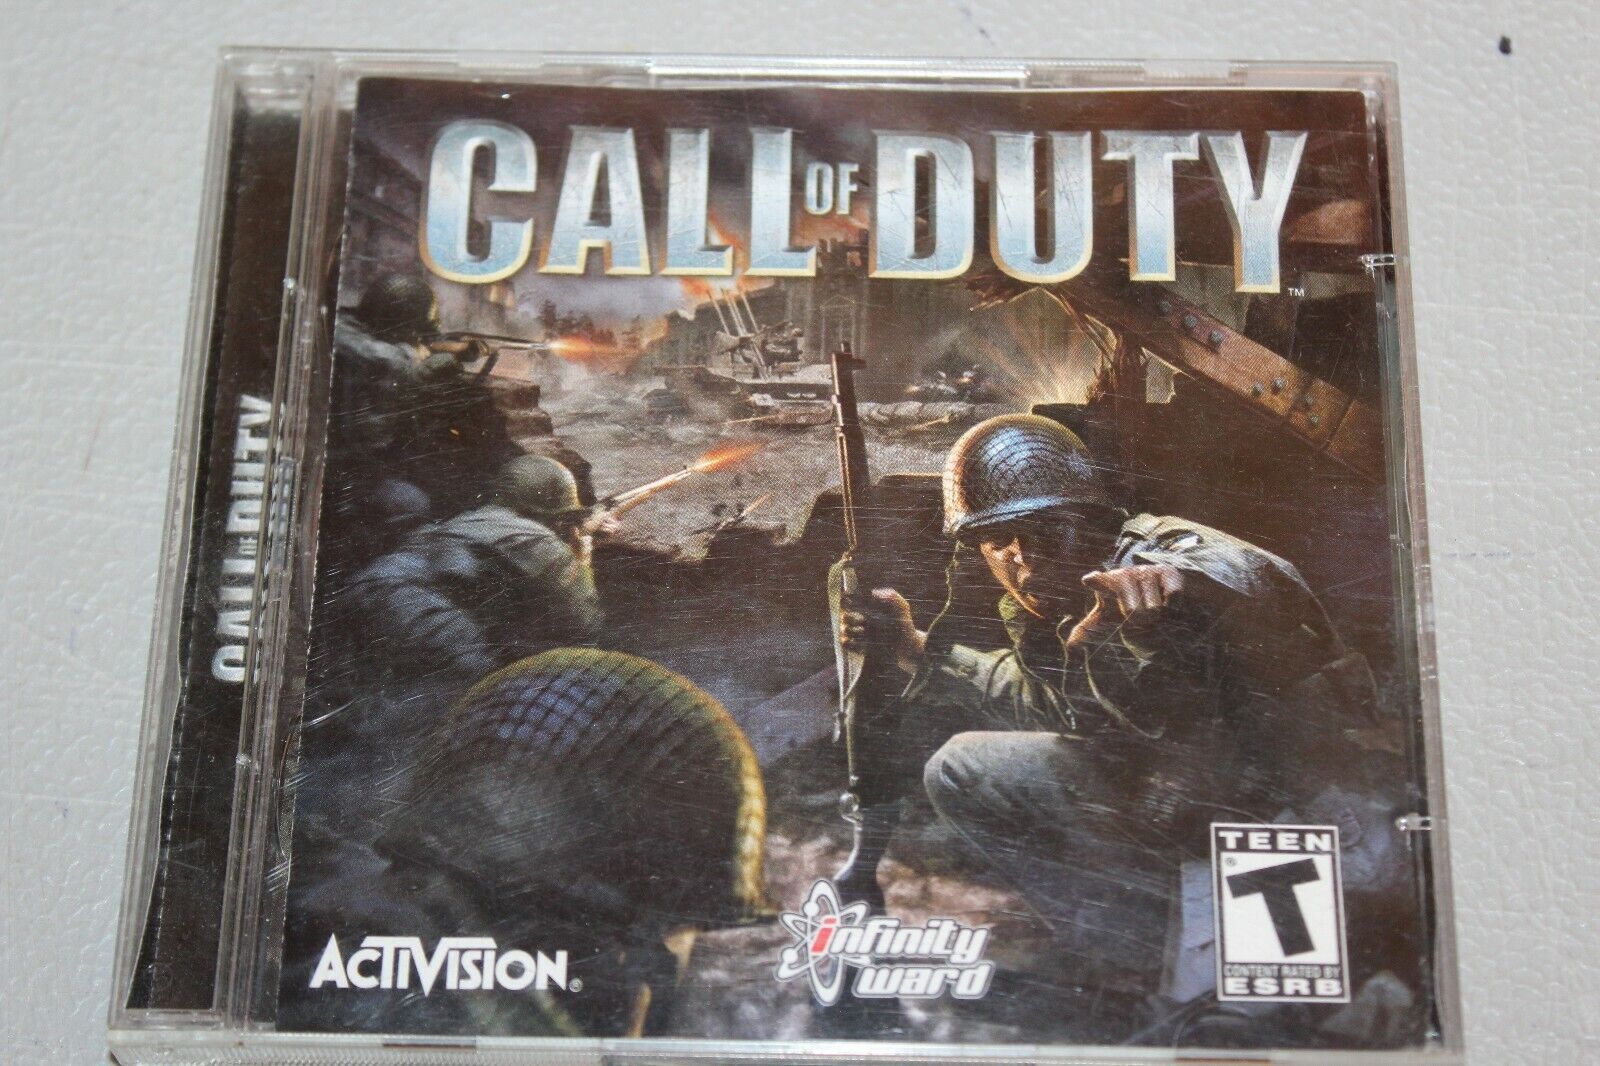 CALL OF DUTY EMPIRES DAWN OF THE MODERN WORLD MICROSOFT WINDOWS GAMES ACTIVISION